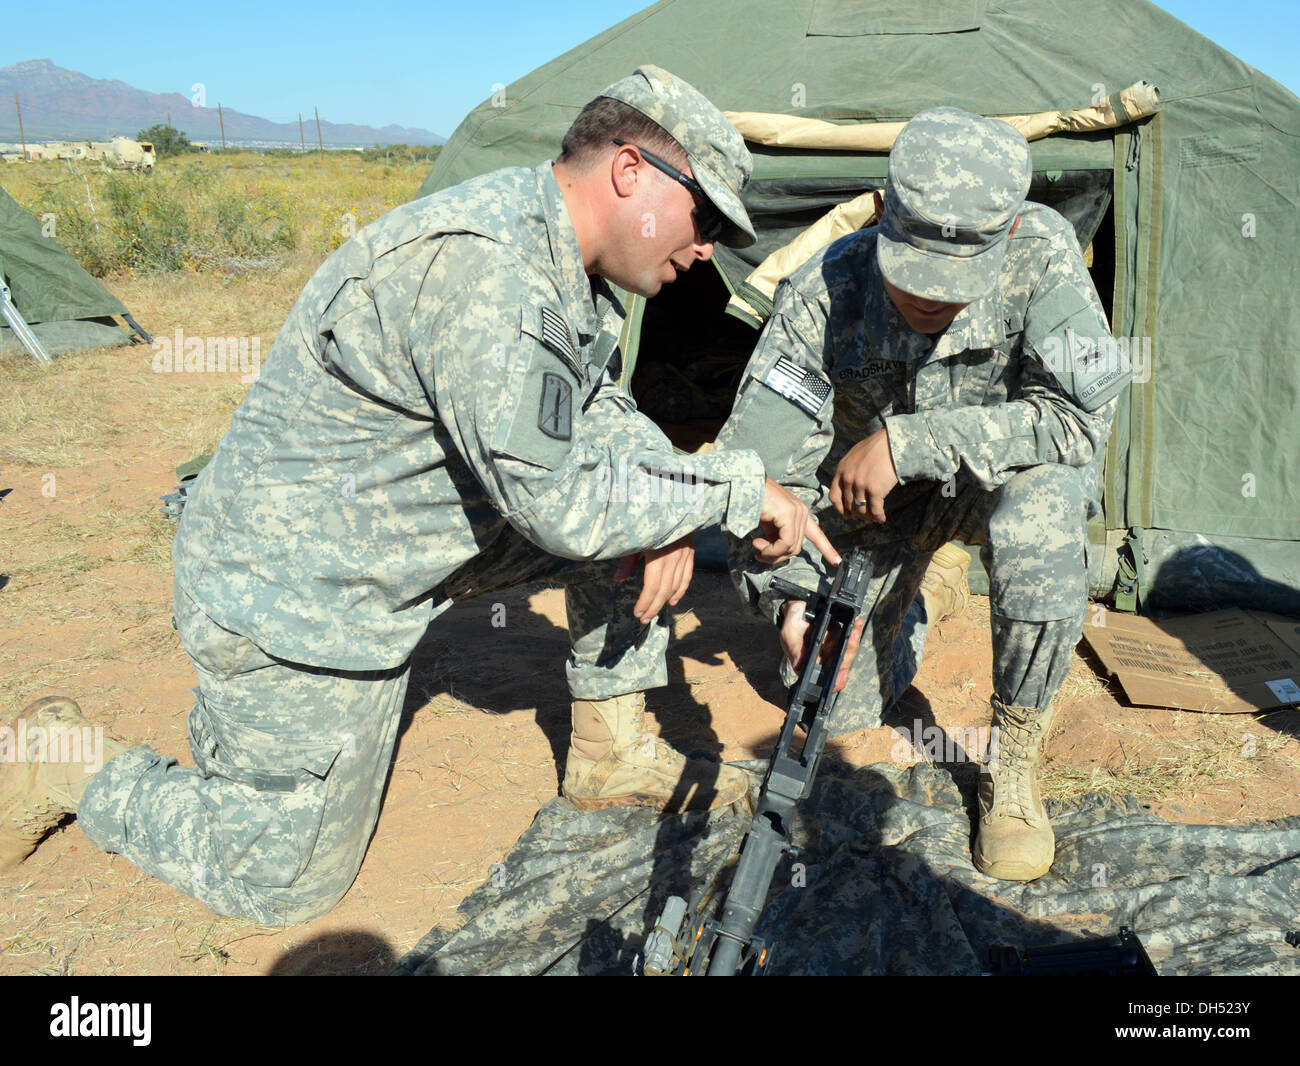 Sgt. Ian Bowman, a squad leader in Alpha Company, 1st Battalion, 6th Infantry Regiment, 2nd Brigade, 1st Armored Division, instructs Pvt. Austin Bradshaw, a saw gunner for A Co., 1-6IN, 2/1AD, on assembling a M240B at Fort Bliss, Texas, Oct. 25, 2013. Sol Stock Photo